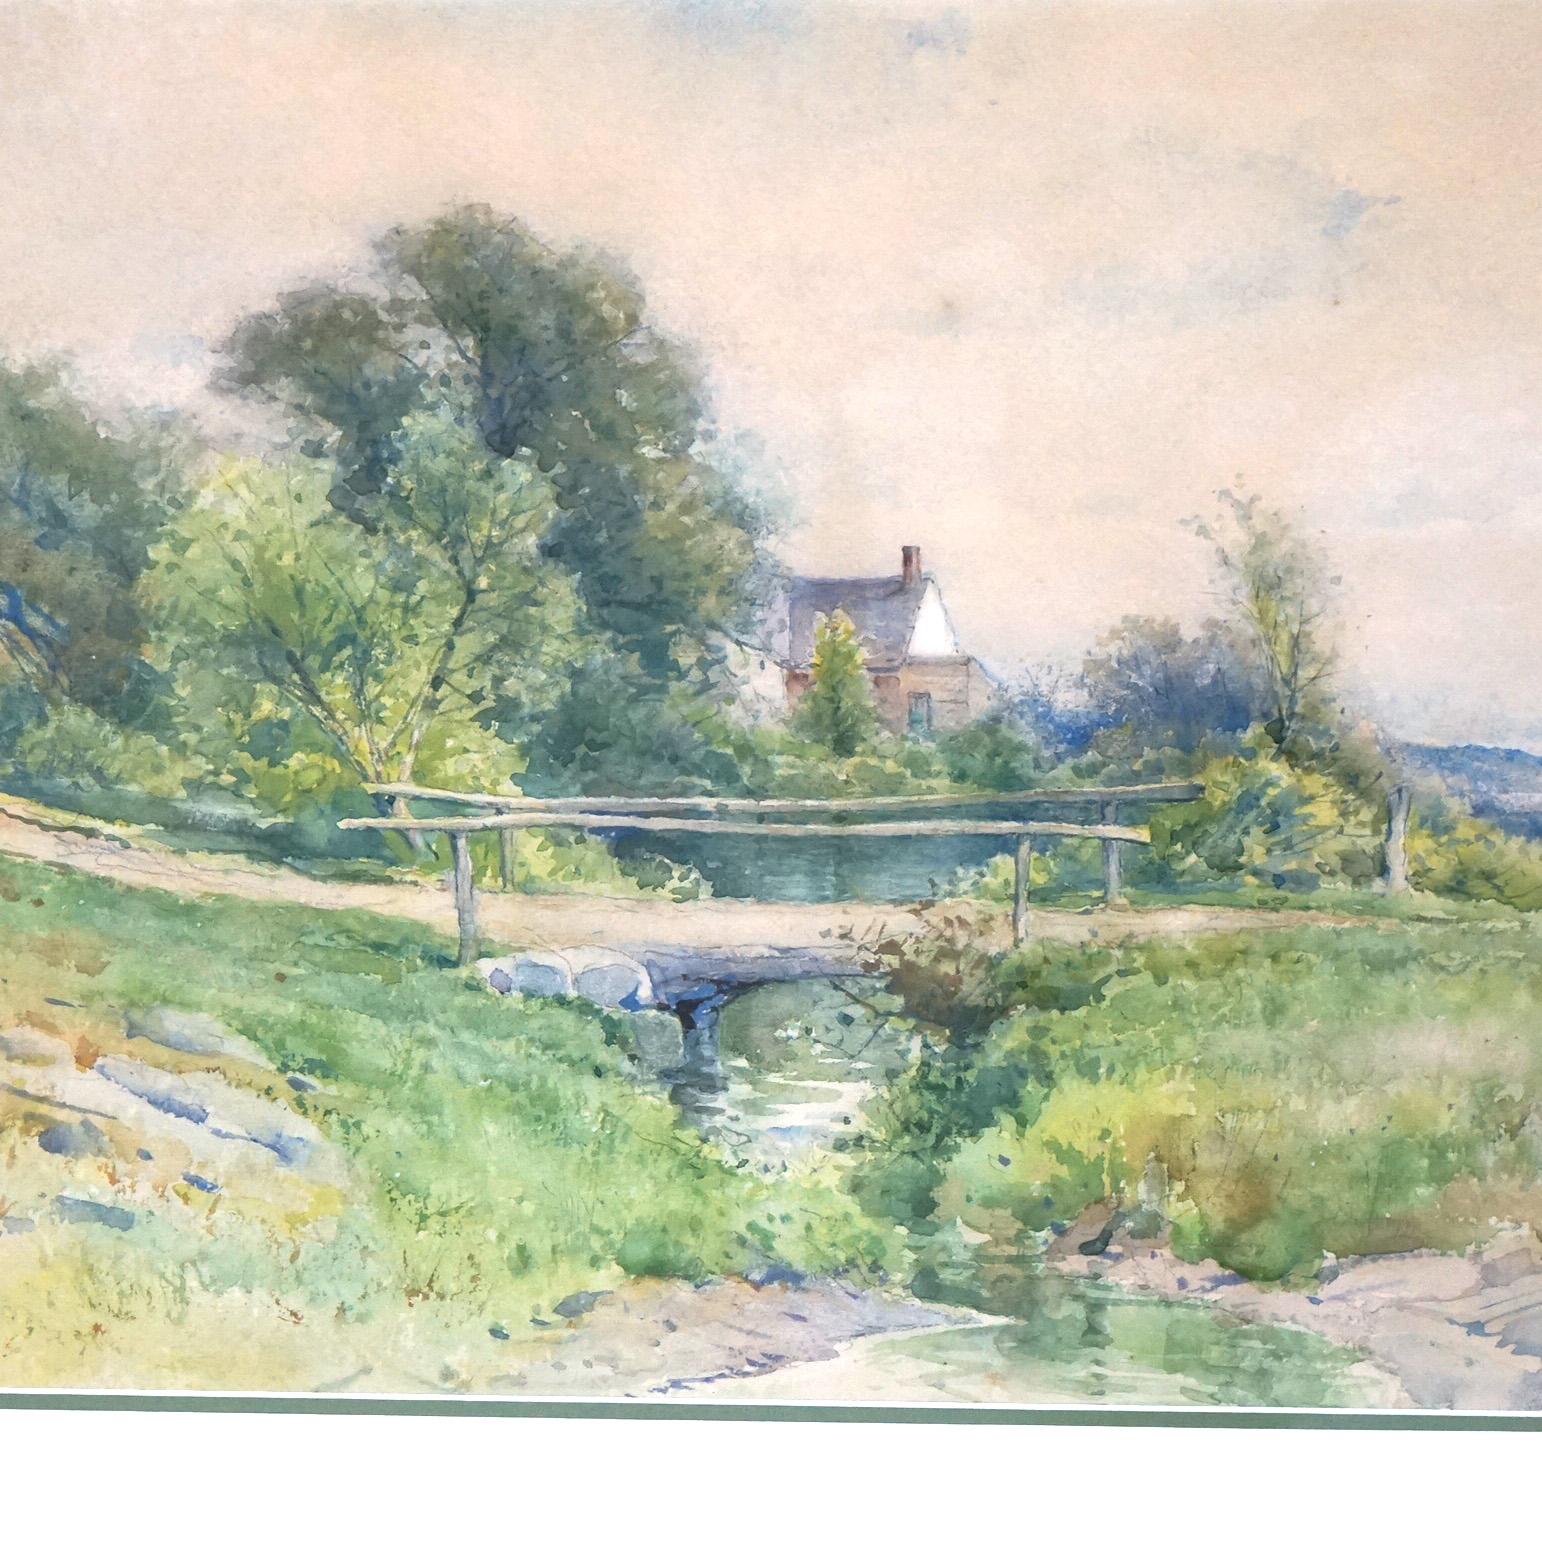 Watercolor Landscape Painting with Country Bridge, Stream & Structure by G H Smillie, Framed, 20thC

Measures- 21.5''H x 28.5''W x 1''D (thick); 25'' x 19'' sight